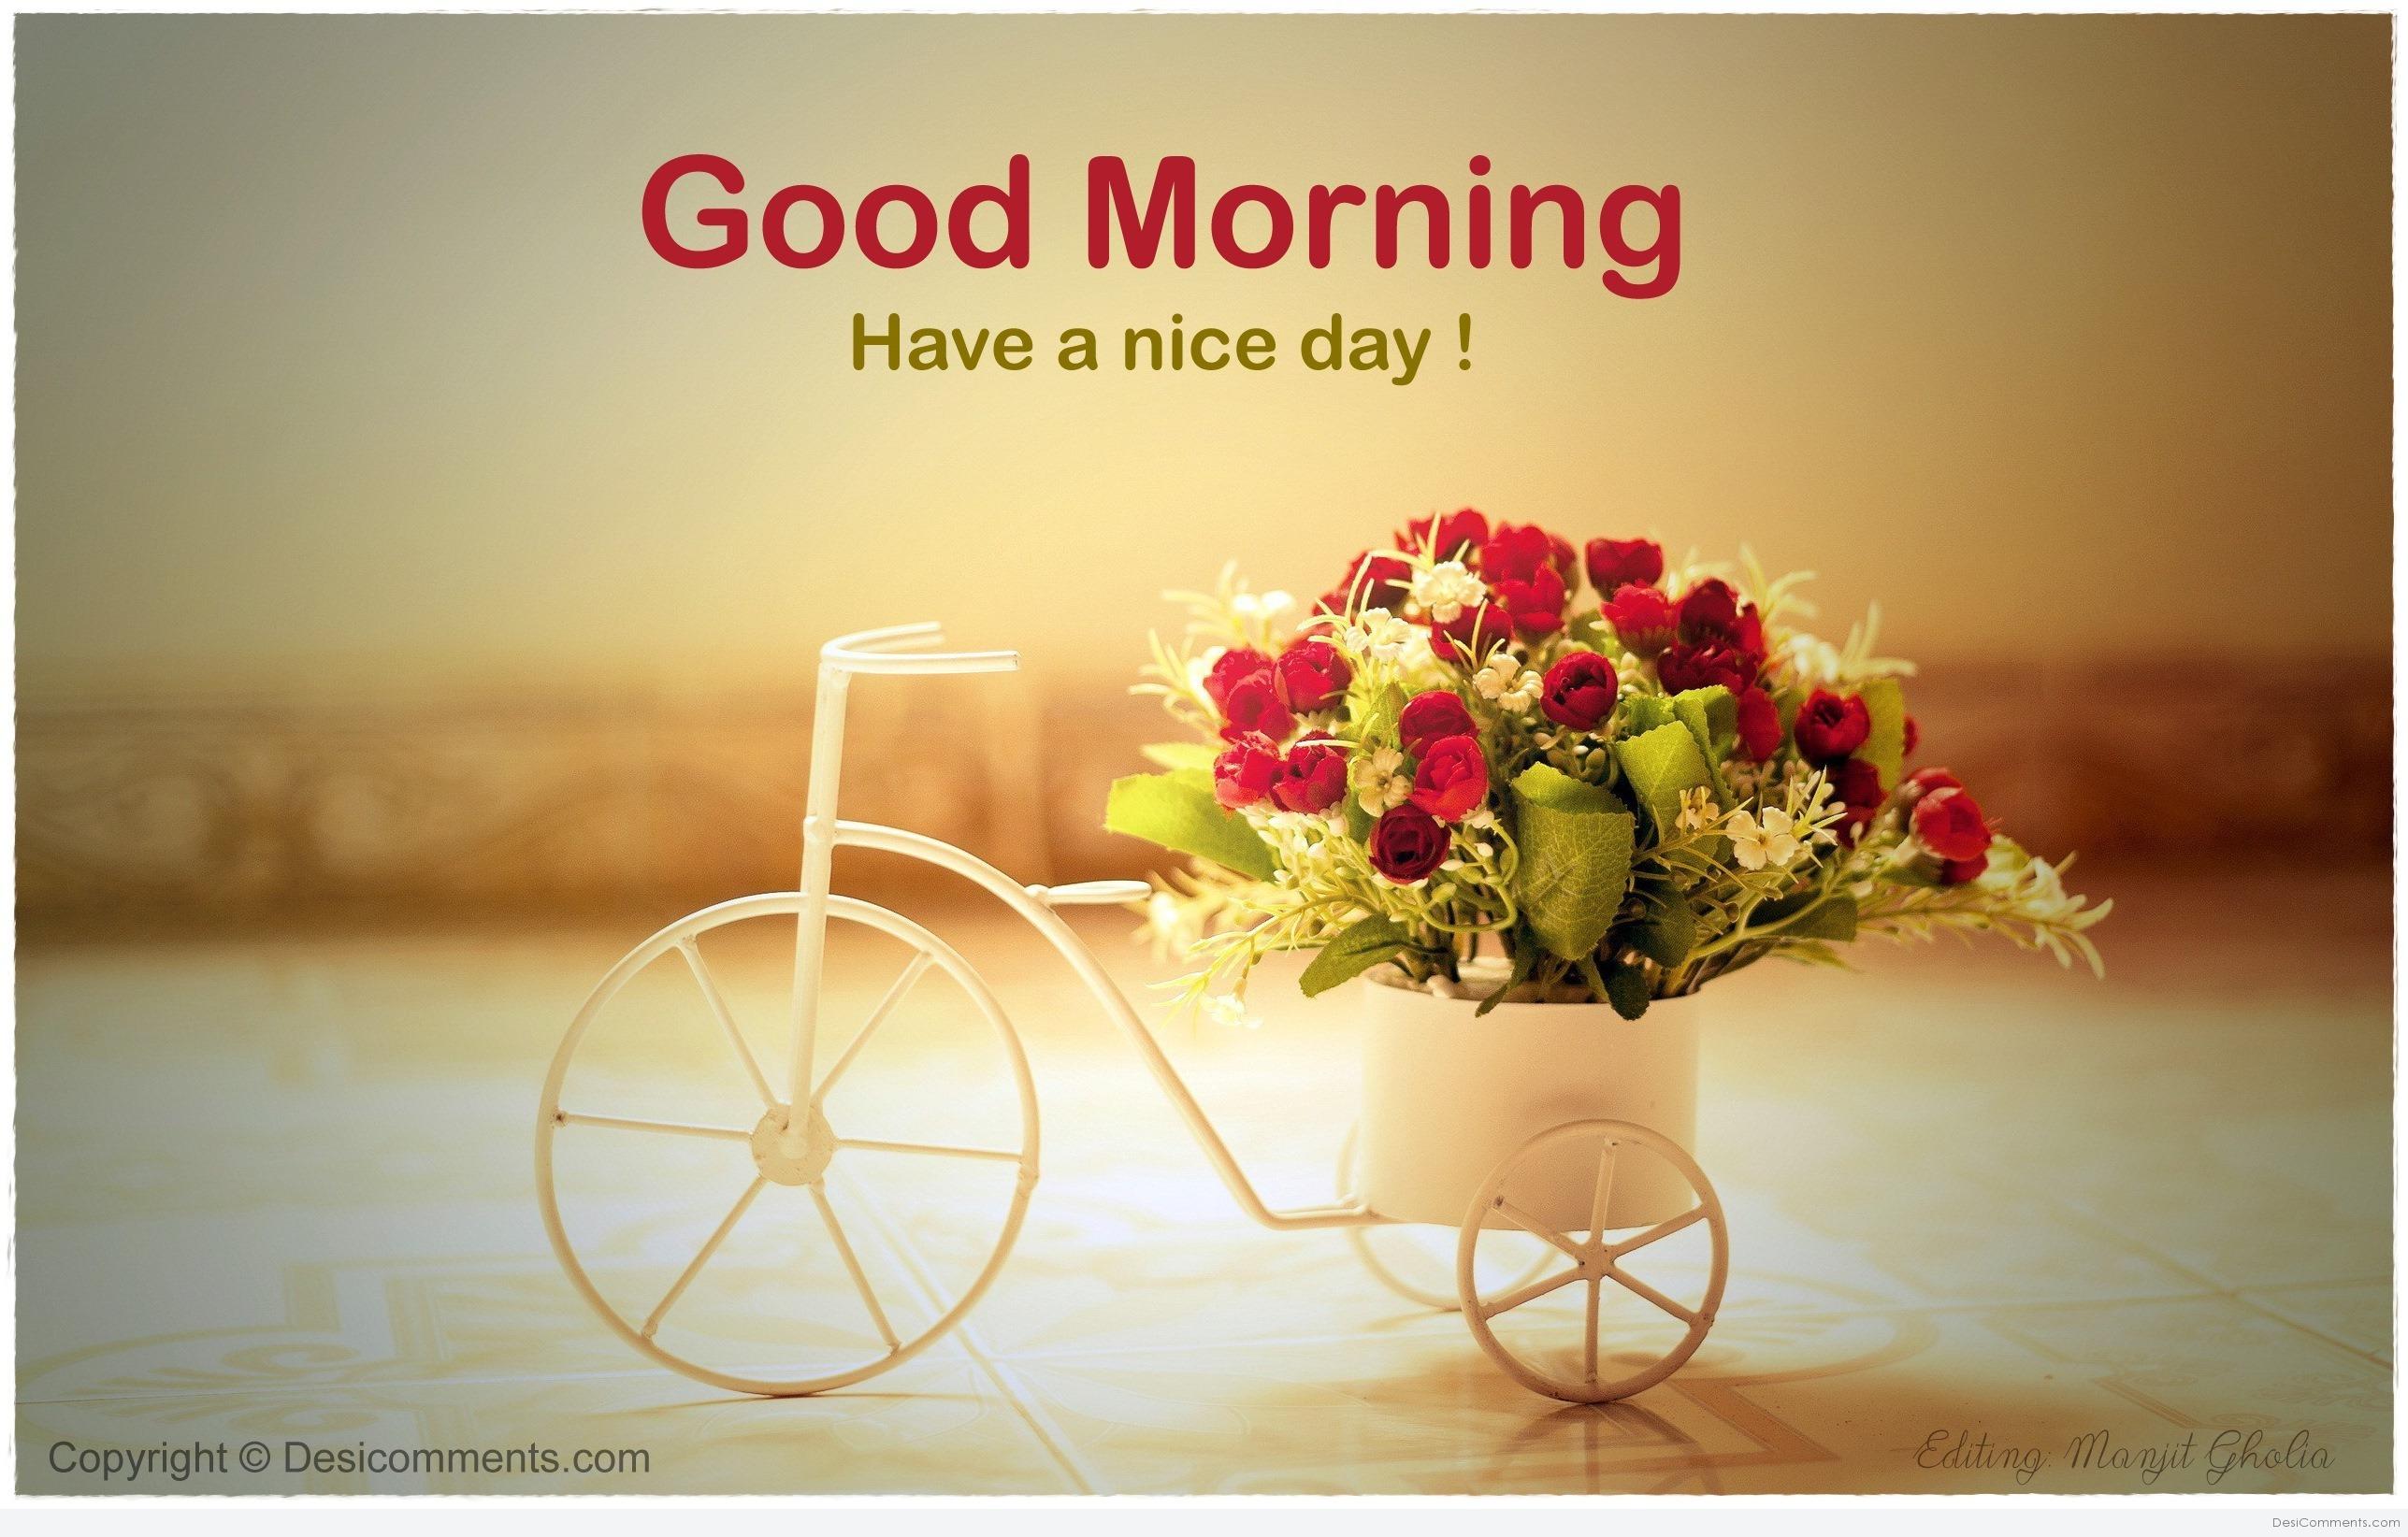 Download free images of good morning